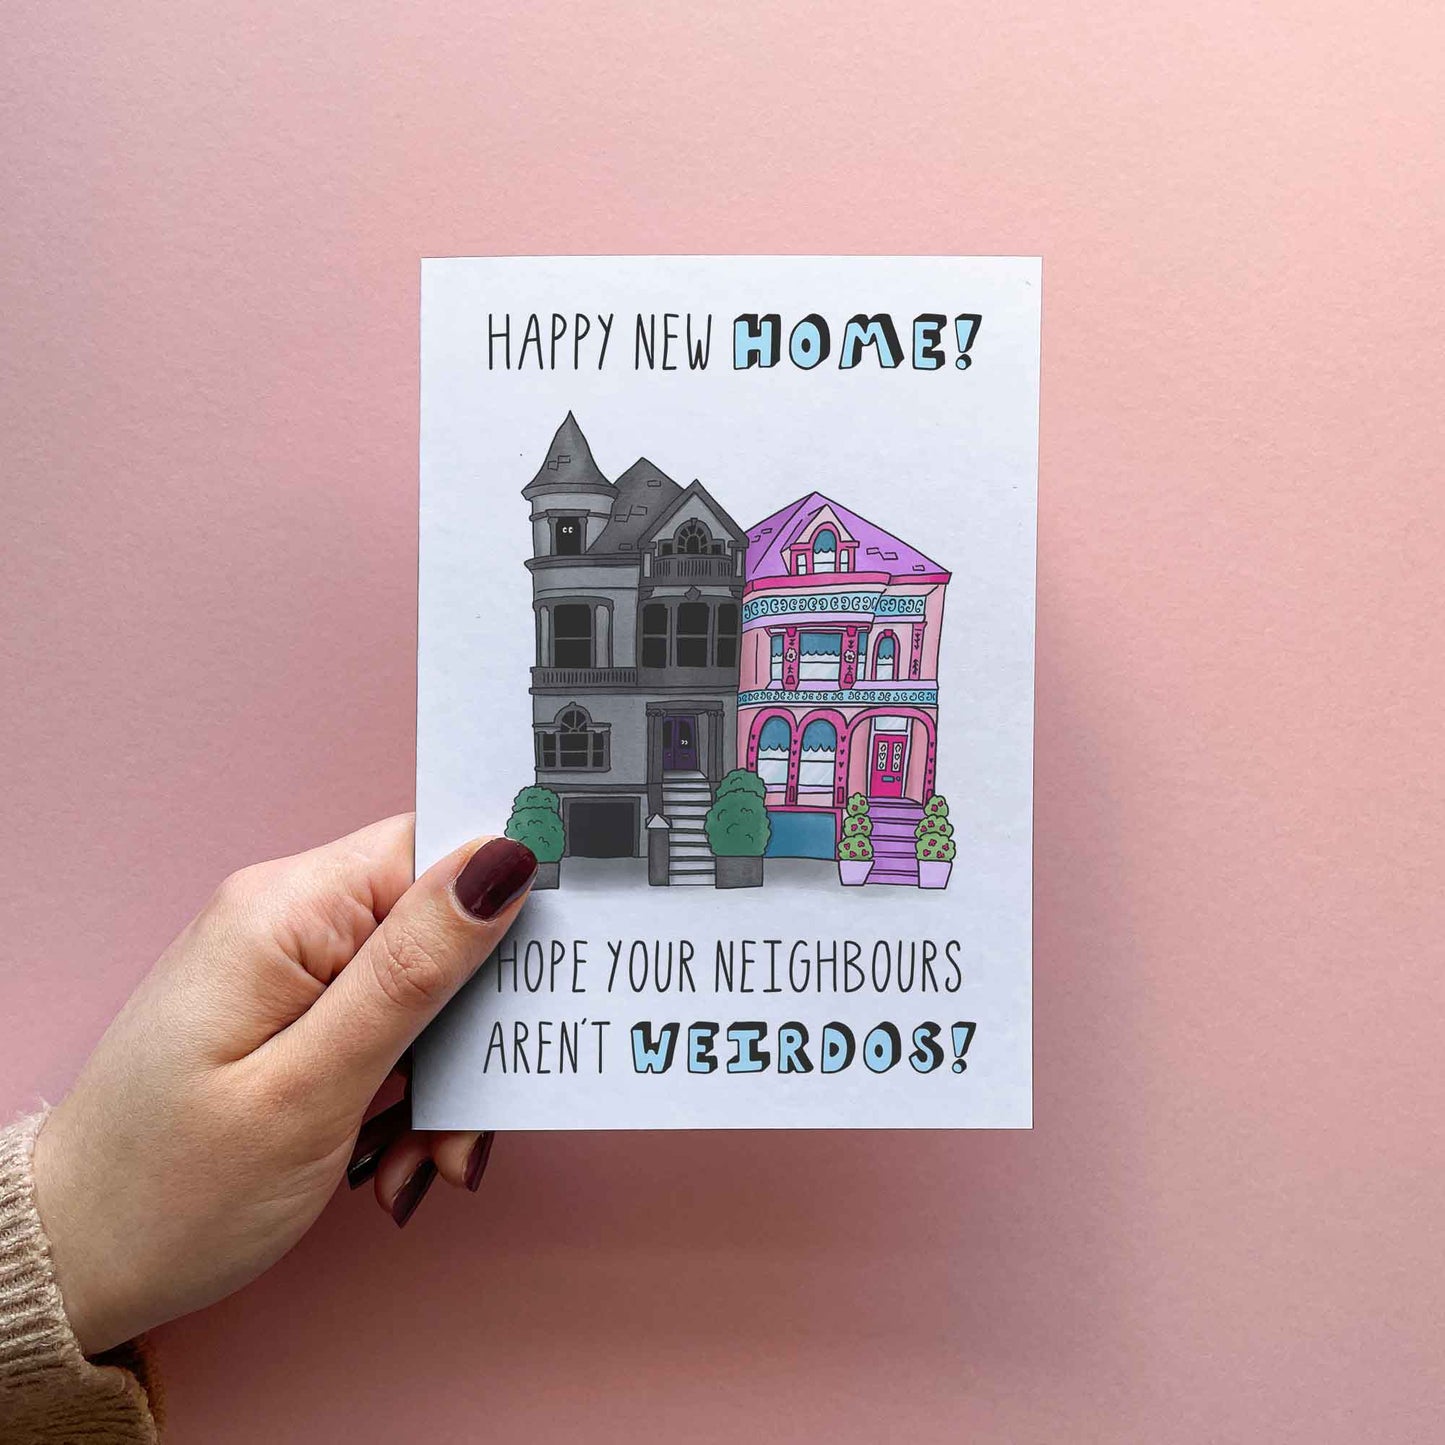  Funny new home / housewarming card reading 'Happy new home! Hope your neighbours aren't weirdos! Featuring an illustration of a spooky gothic house and pink barbie house next to each other.